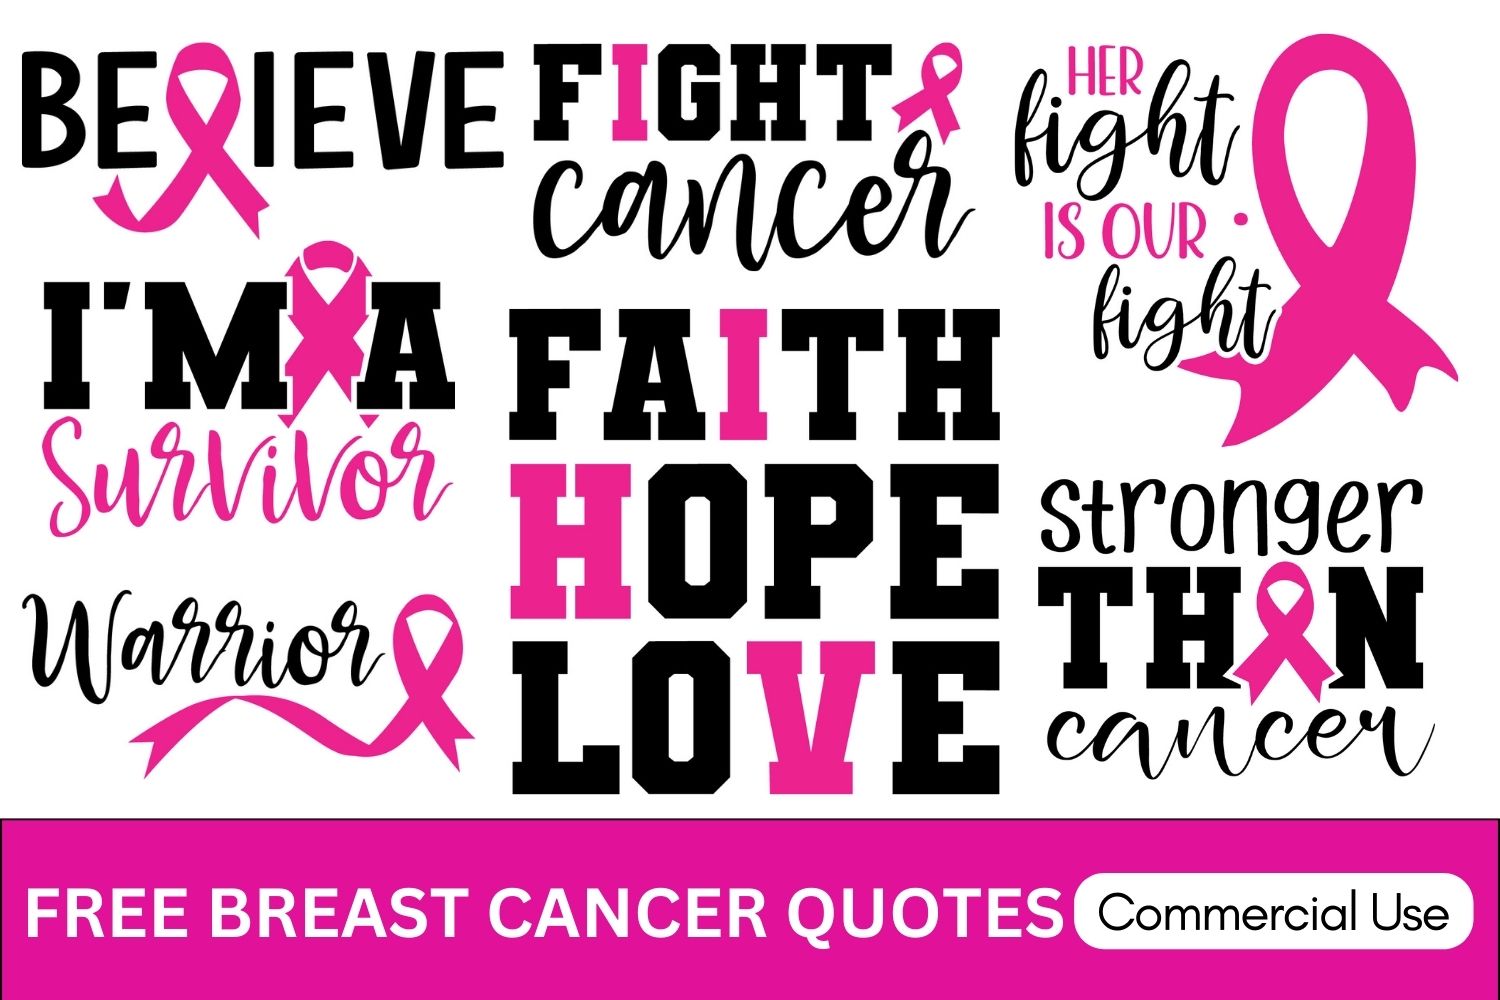 Breast cancer quotes & sayings, Pink Awareness ribbon,Cancer Awareness, Fight Cancer, Cancer Quote ,tackle cancer , Cancer Survivor, Cancer Cut File, SVG files, cricut, download, free